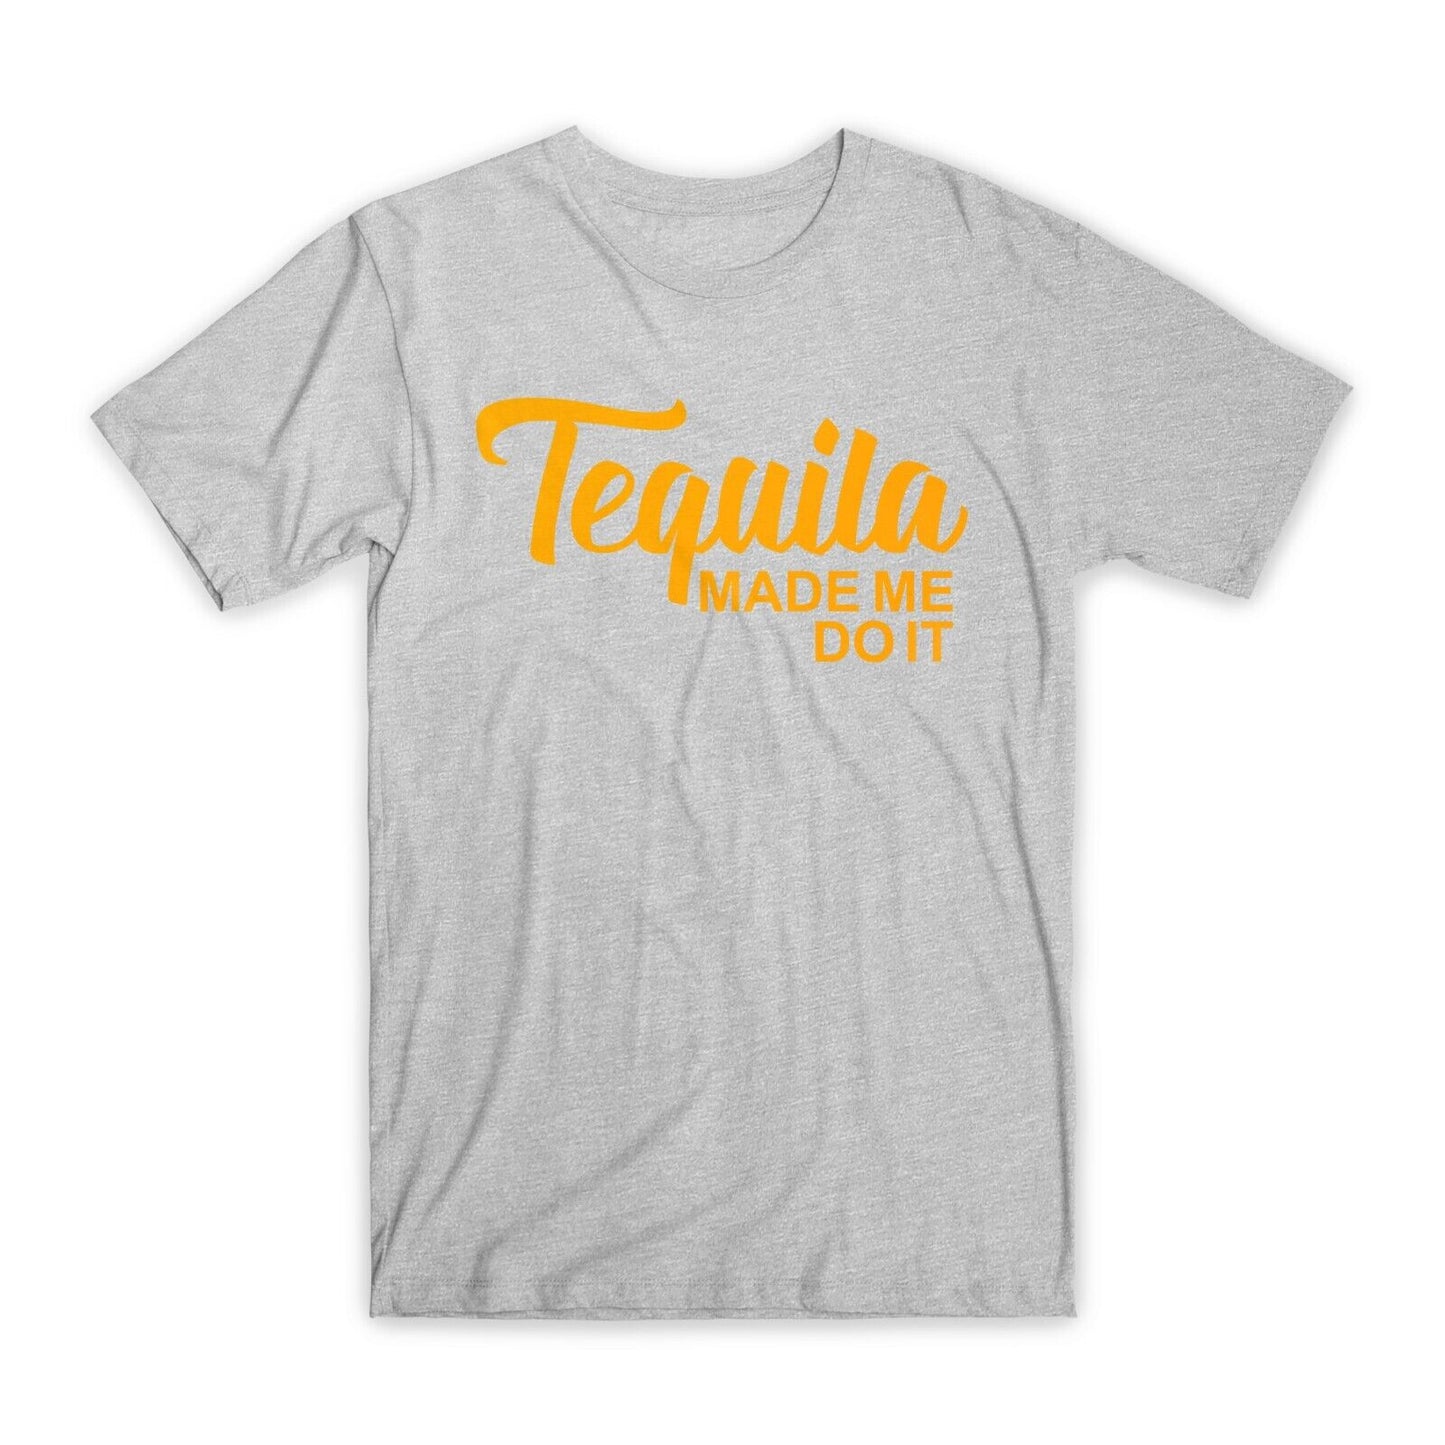 Tequila Made Me Do It T-Shirt Premium Soft Cotton Crew Neck Funny Tees Gifts NEW